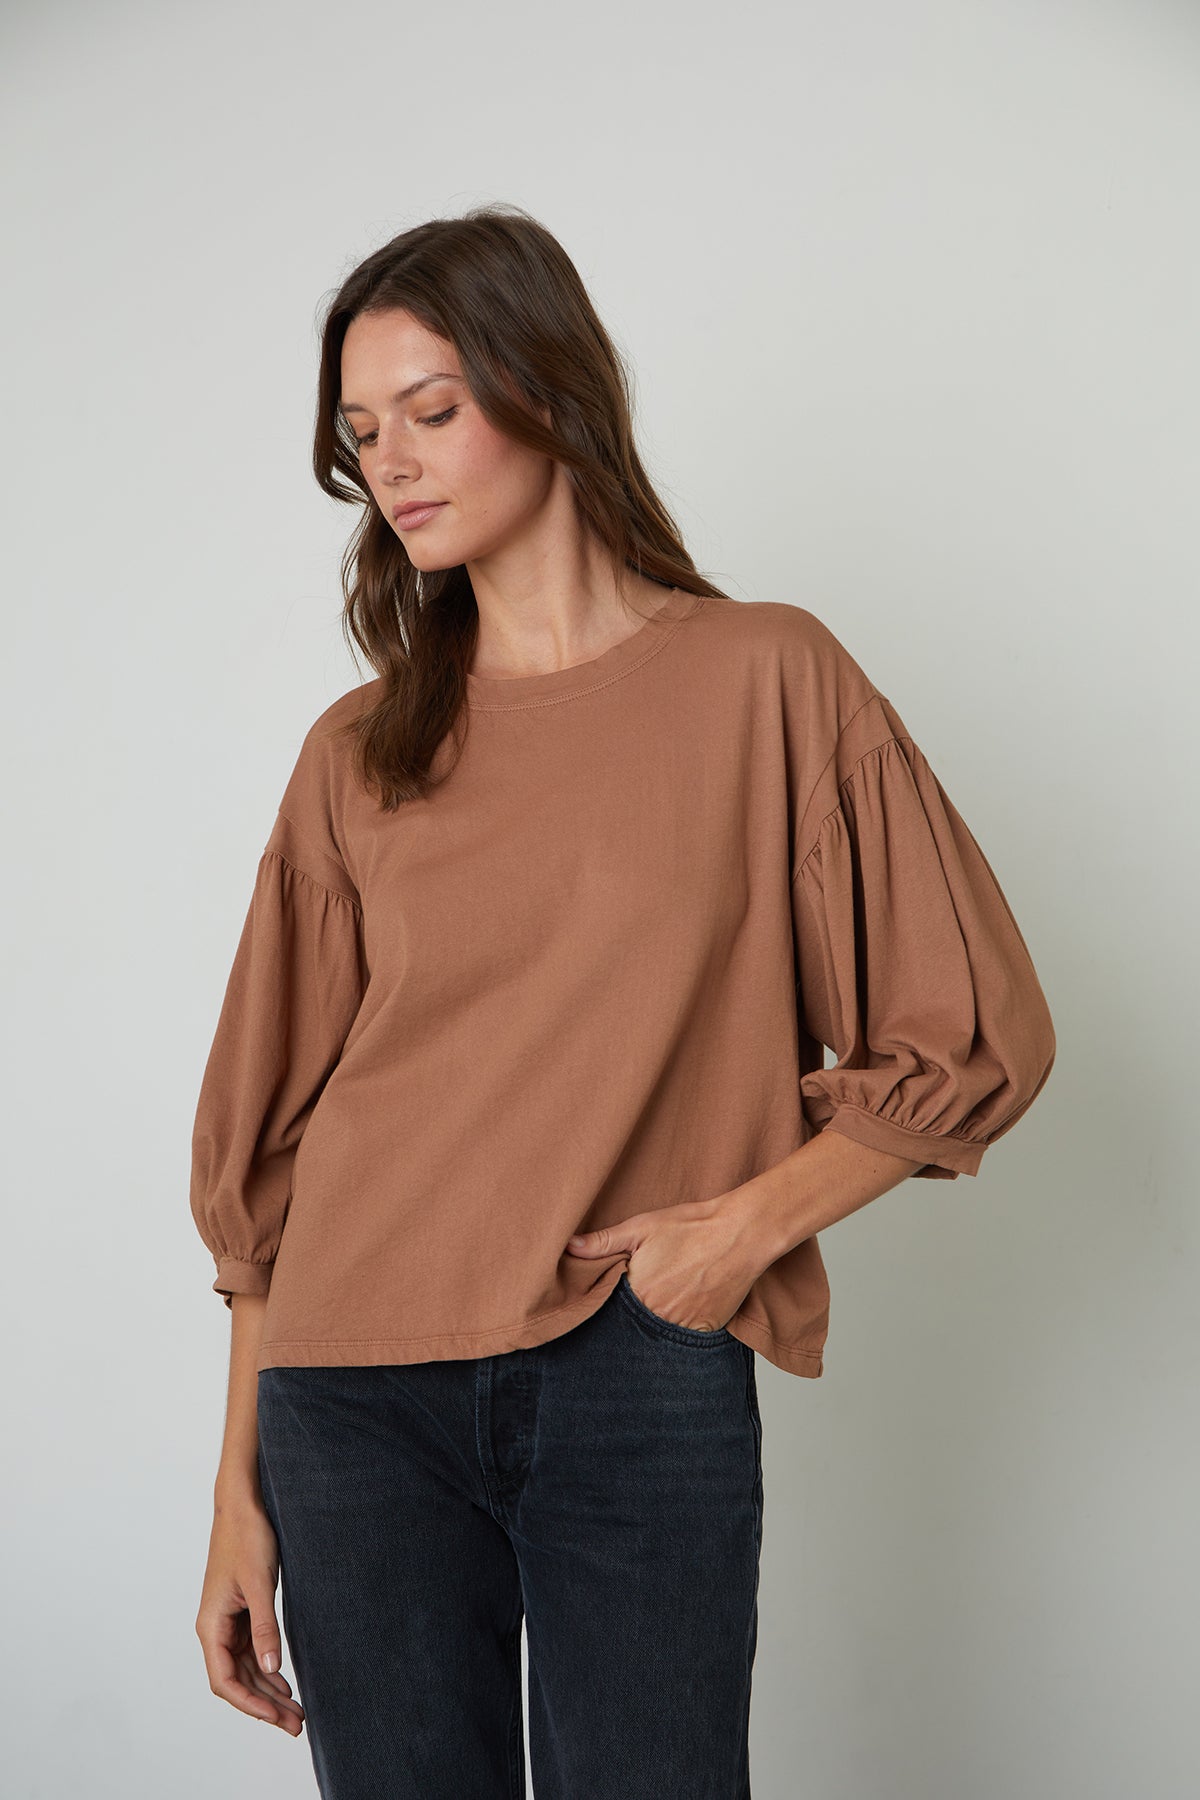 The PRUDY 3/4 SLEEVE TEE in tan, by Velvet by Graham & Spencer, adds volume to your outfit.-25577590128833